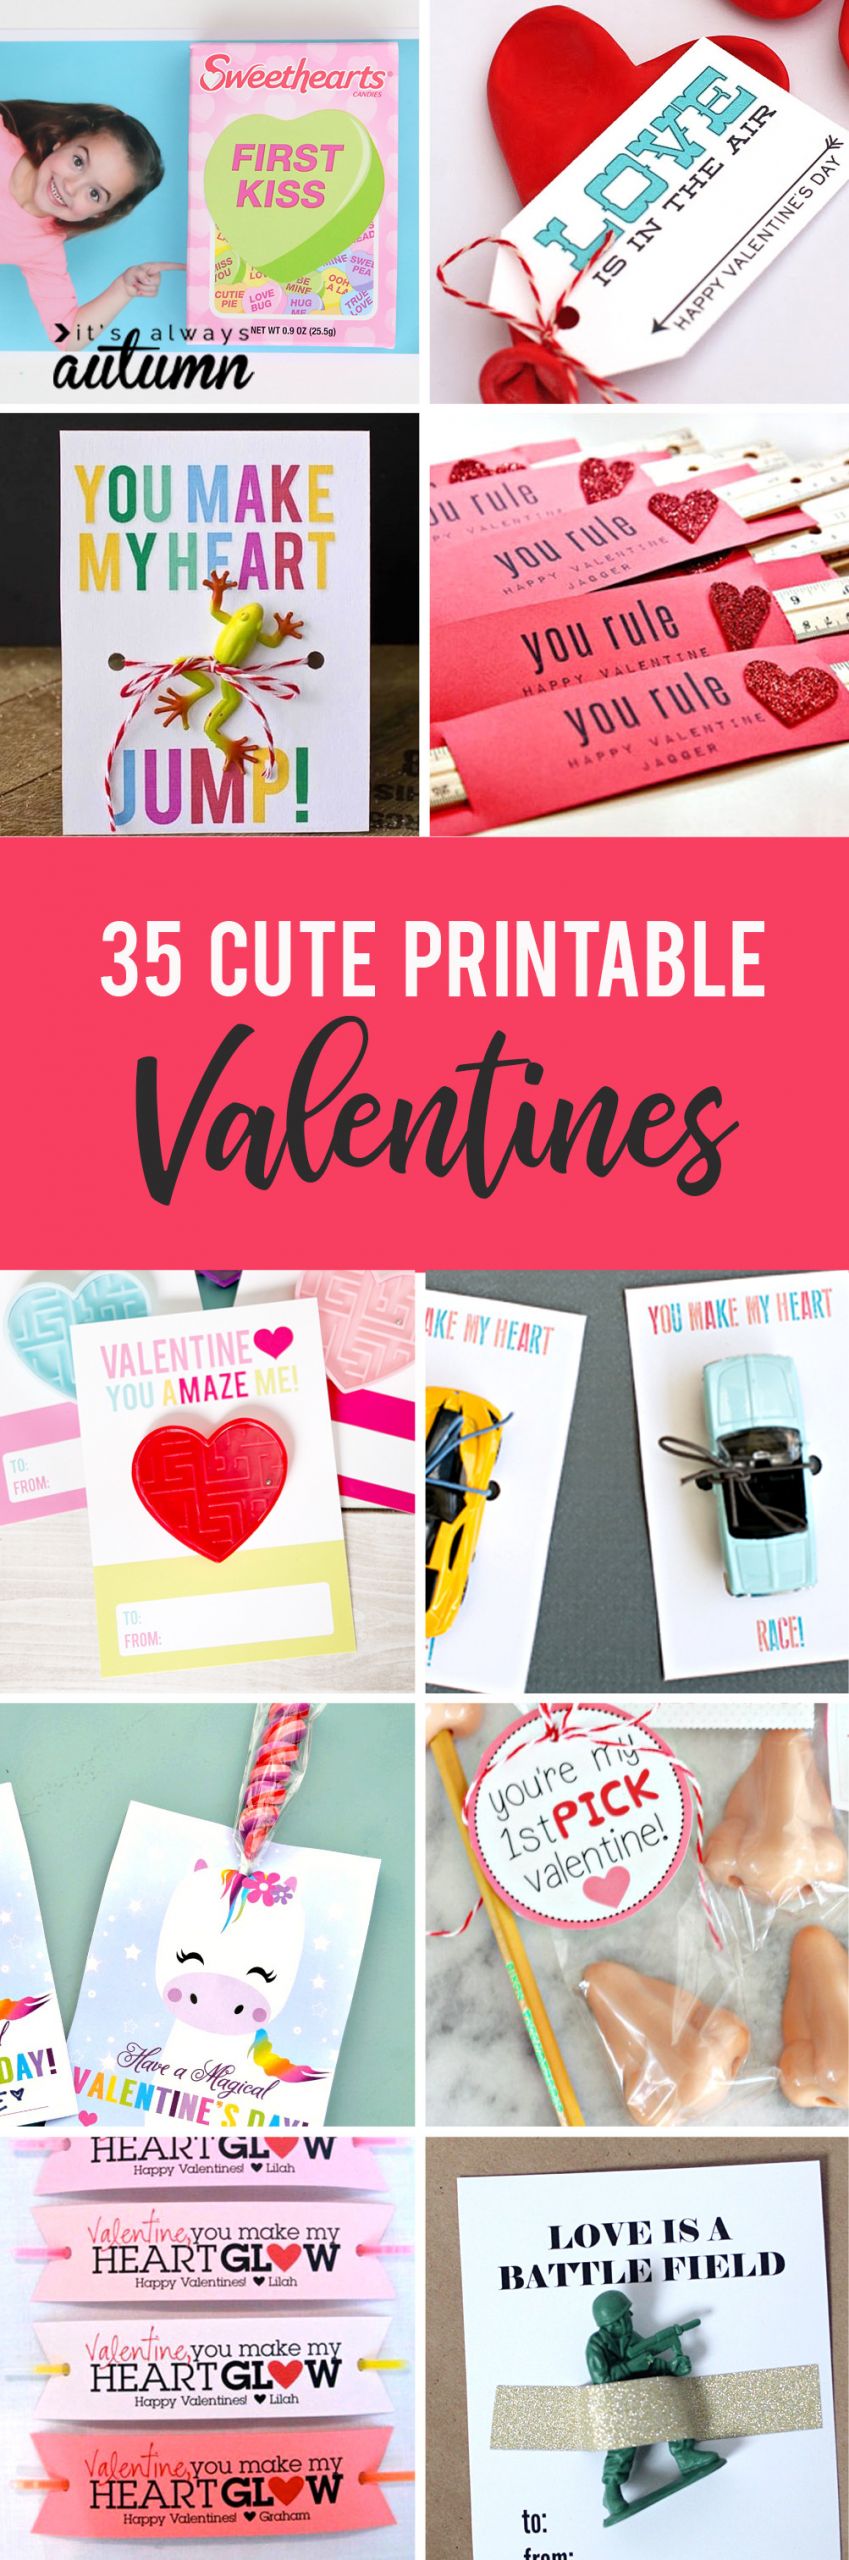 DIY Valentines Cards Kids
 35 Adorable DIY Valentines cards for kids that you can